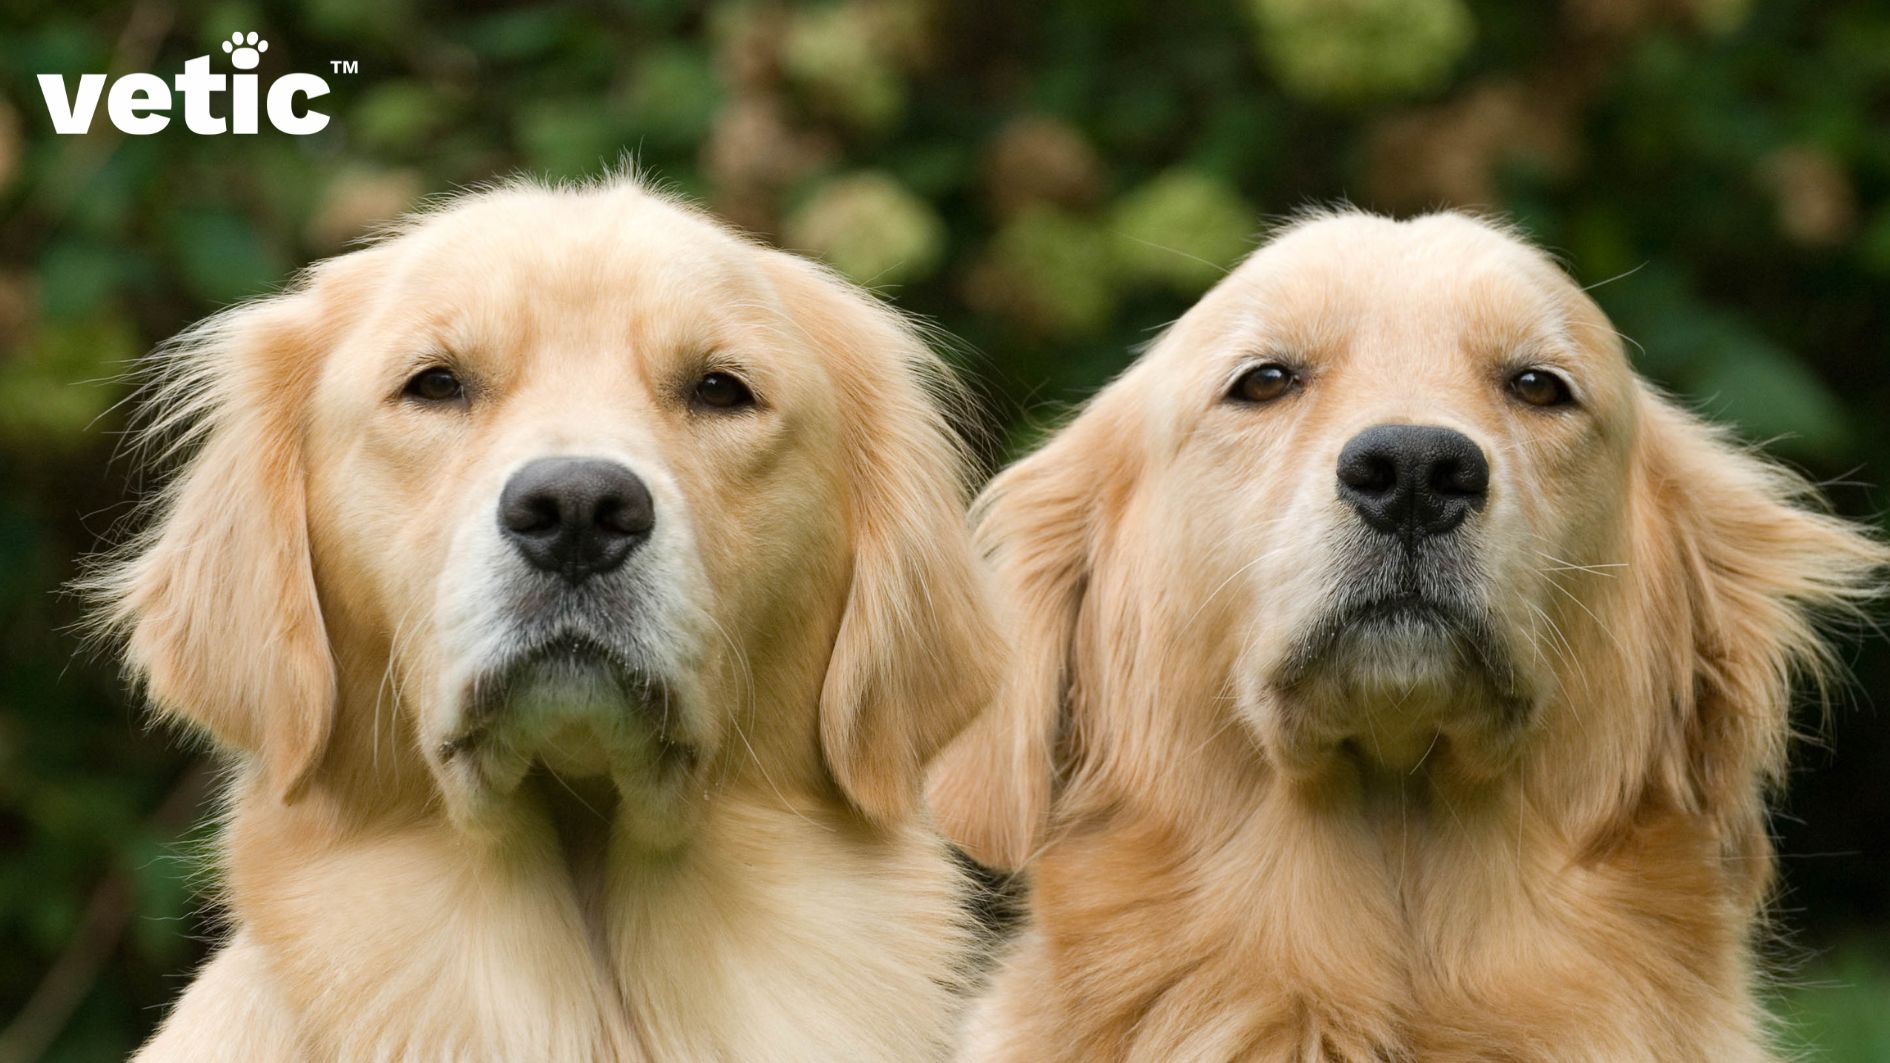 A male and a female golden retriever sitting side by side looking very serious. Labrador vs. Golden retriever is a challenging decision since both breeds are eager to please and make friends easily